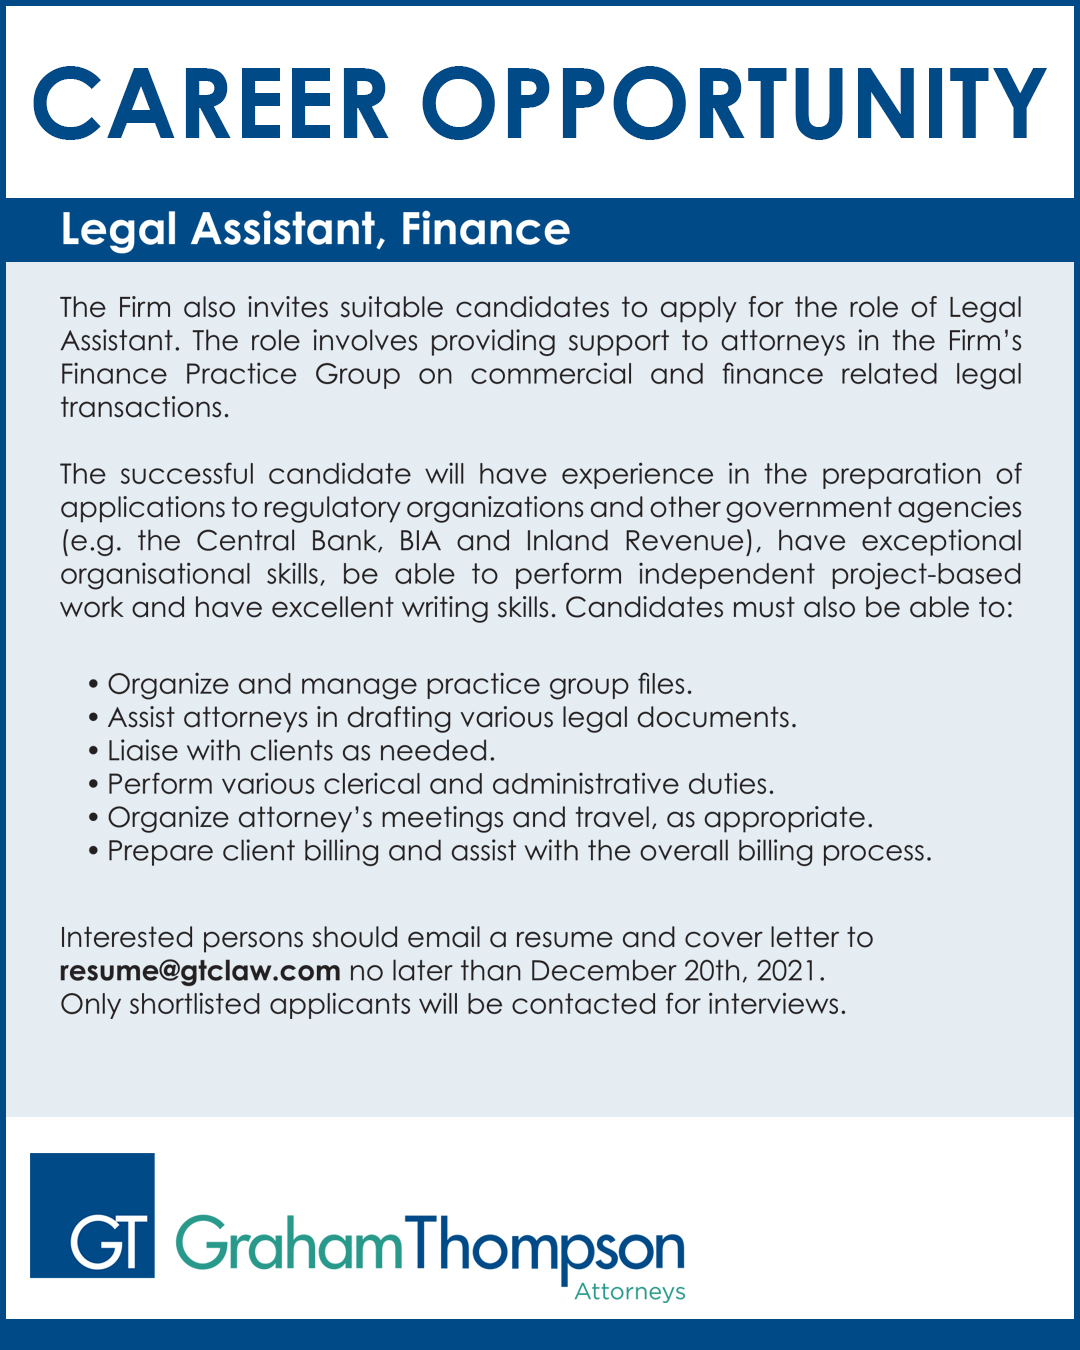 CAREER OPORTUNITY, LEGAL ASSISTANT, FINANCE